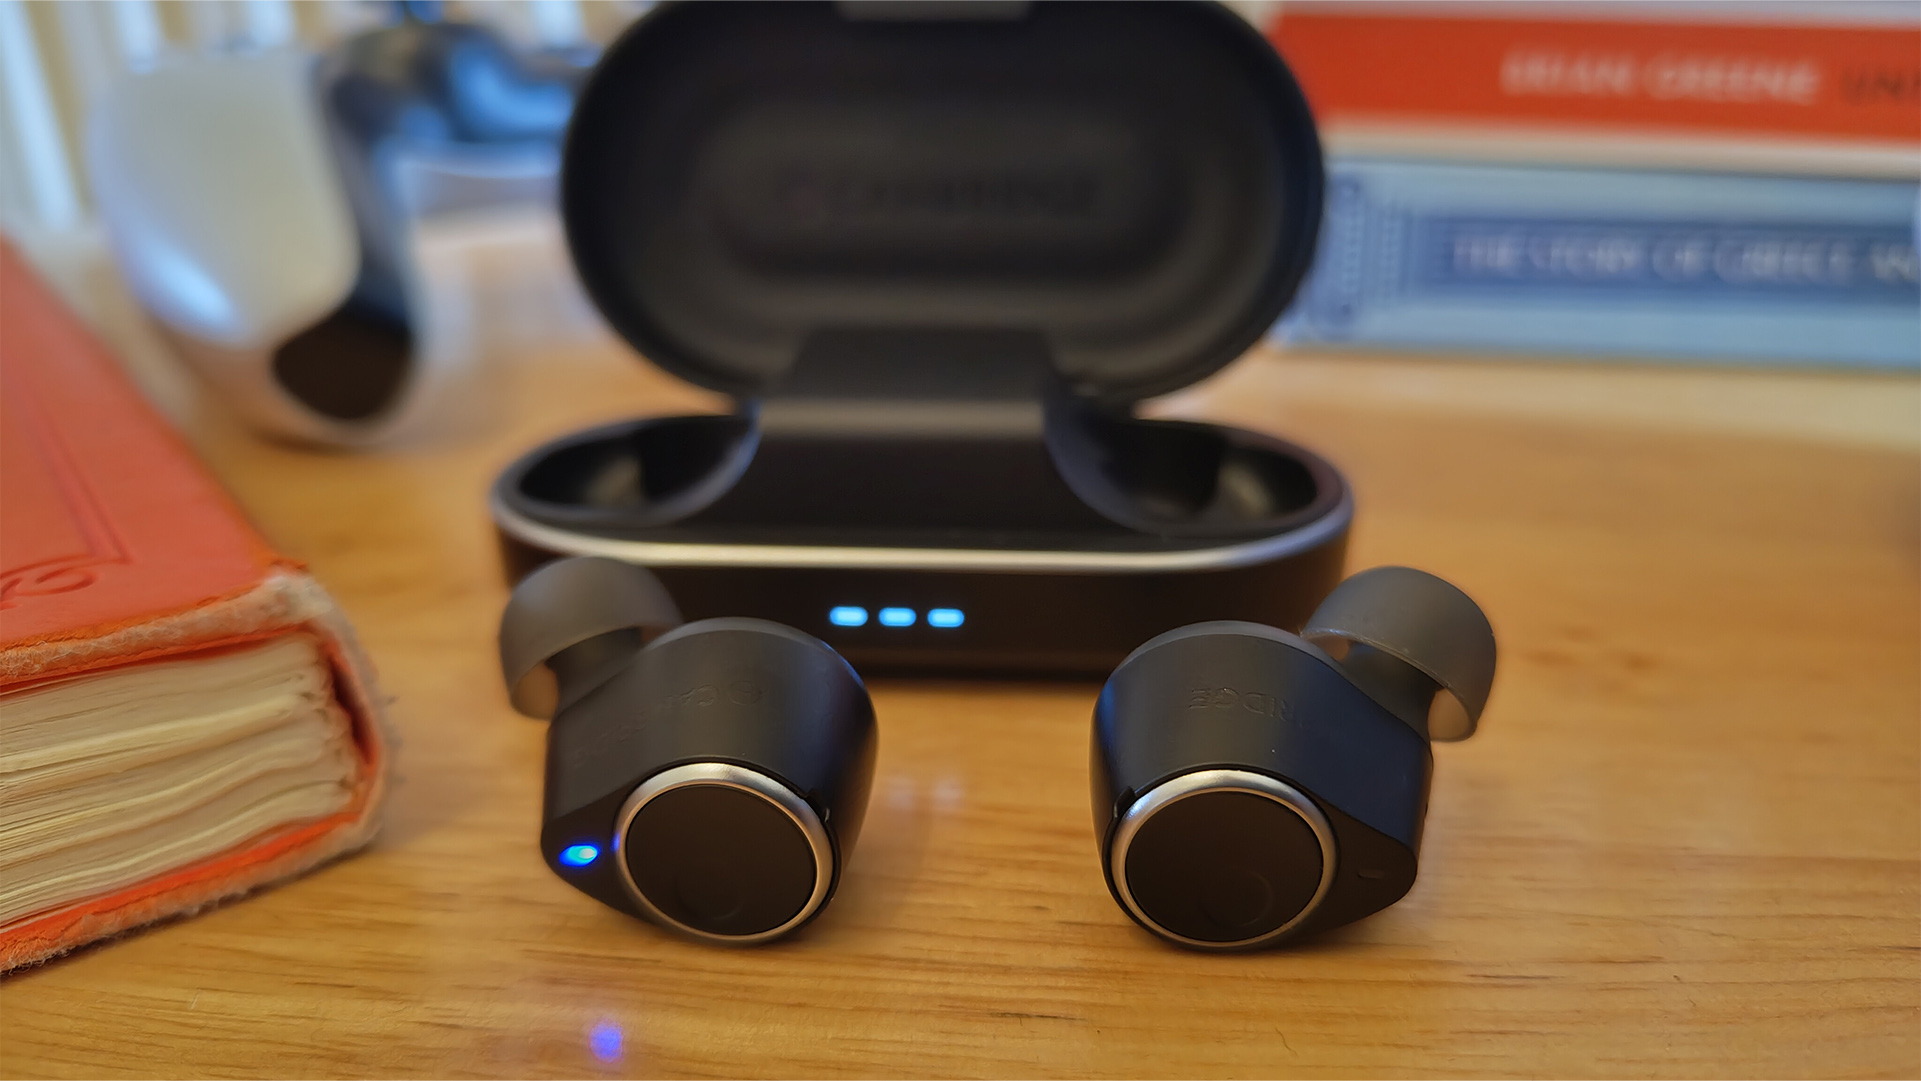 Cambridge Audio Melomania M100 wireless earbuds in front of case on wooden table